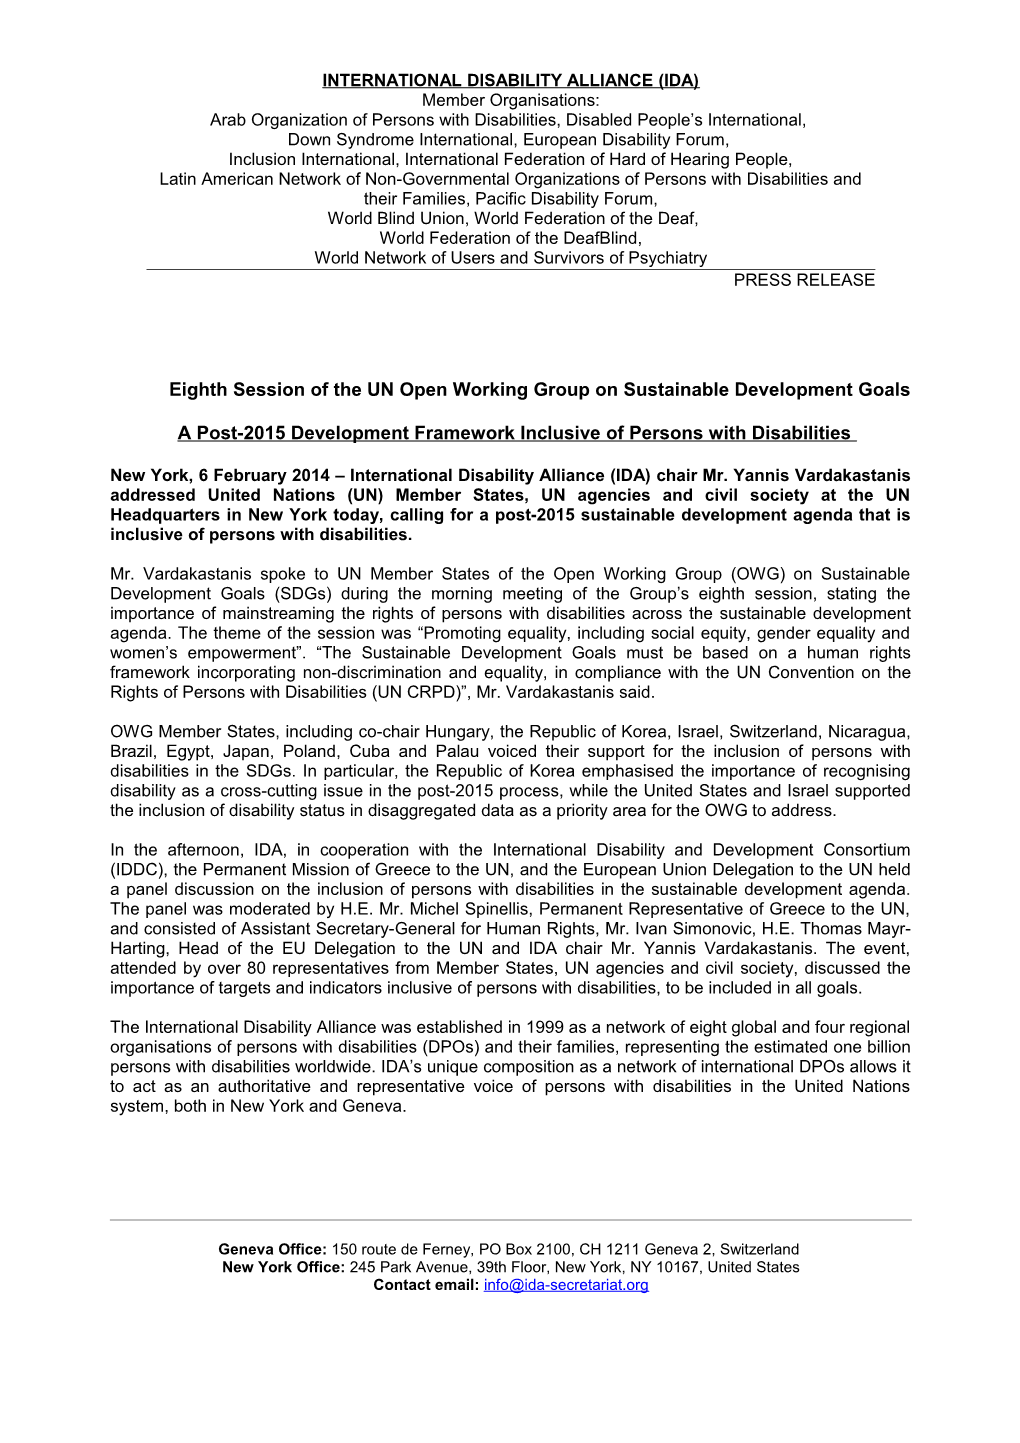 Eighth Session of the UN Open Working Group on Sustainable Development Goals